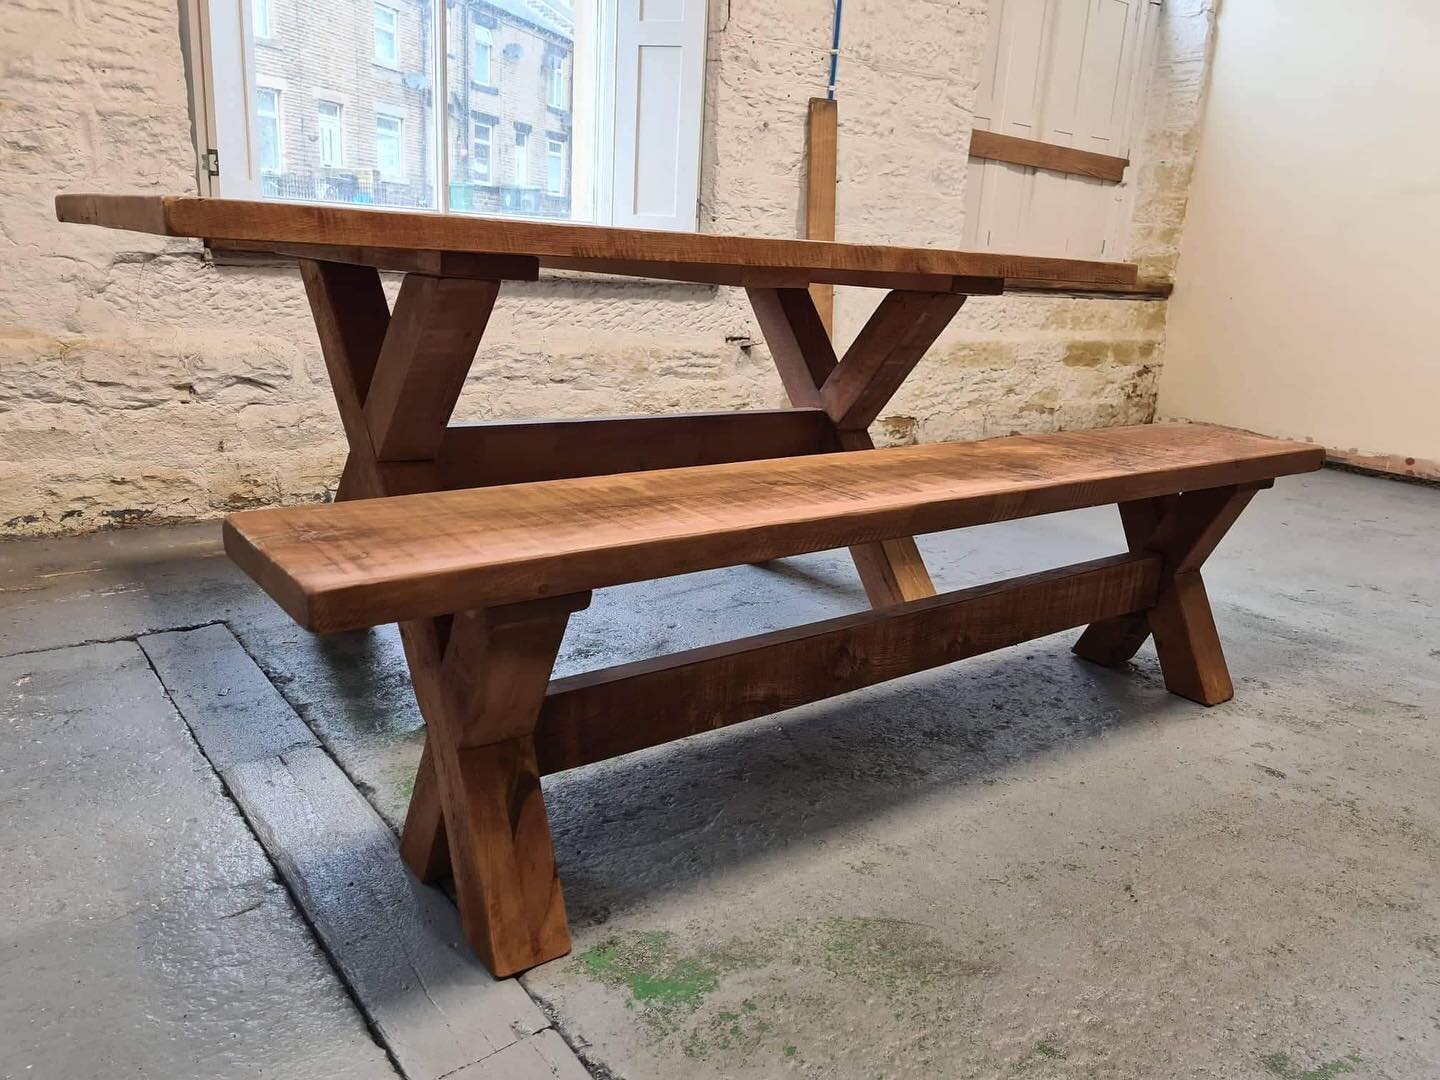 A chunky cross leg table &amp; bench in our Rustic range. 🤩

Check out our website to see what styles we cover for all your kitchen &amp; furniture needs - 

www.framedkitchens.co.uk
.
#rustic #rusticdecor #kitcheninspo #leeds #bespoke #homeinterior